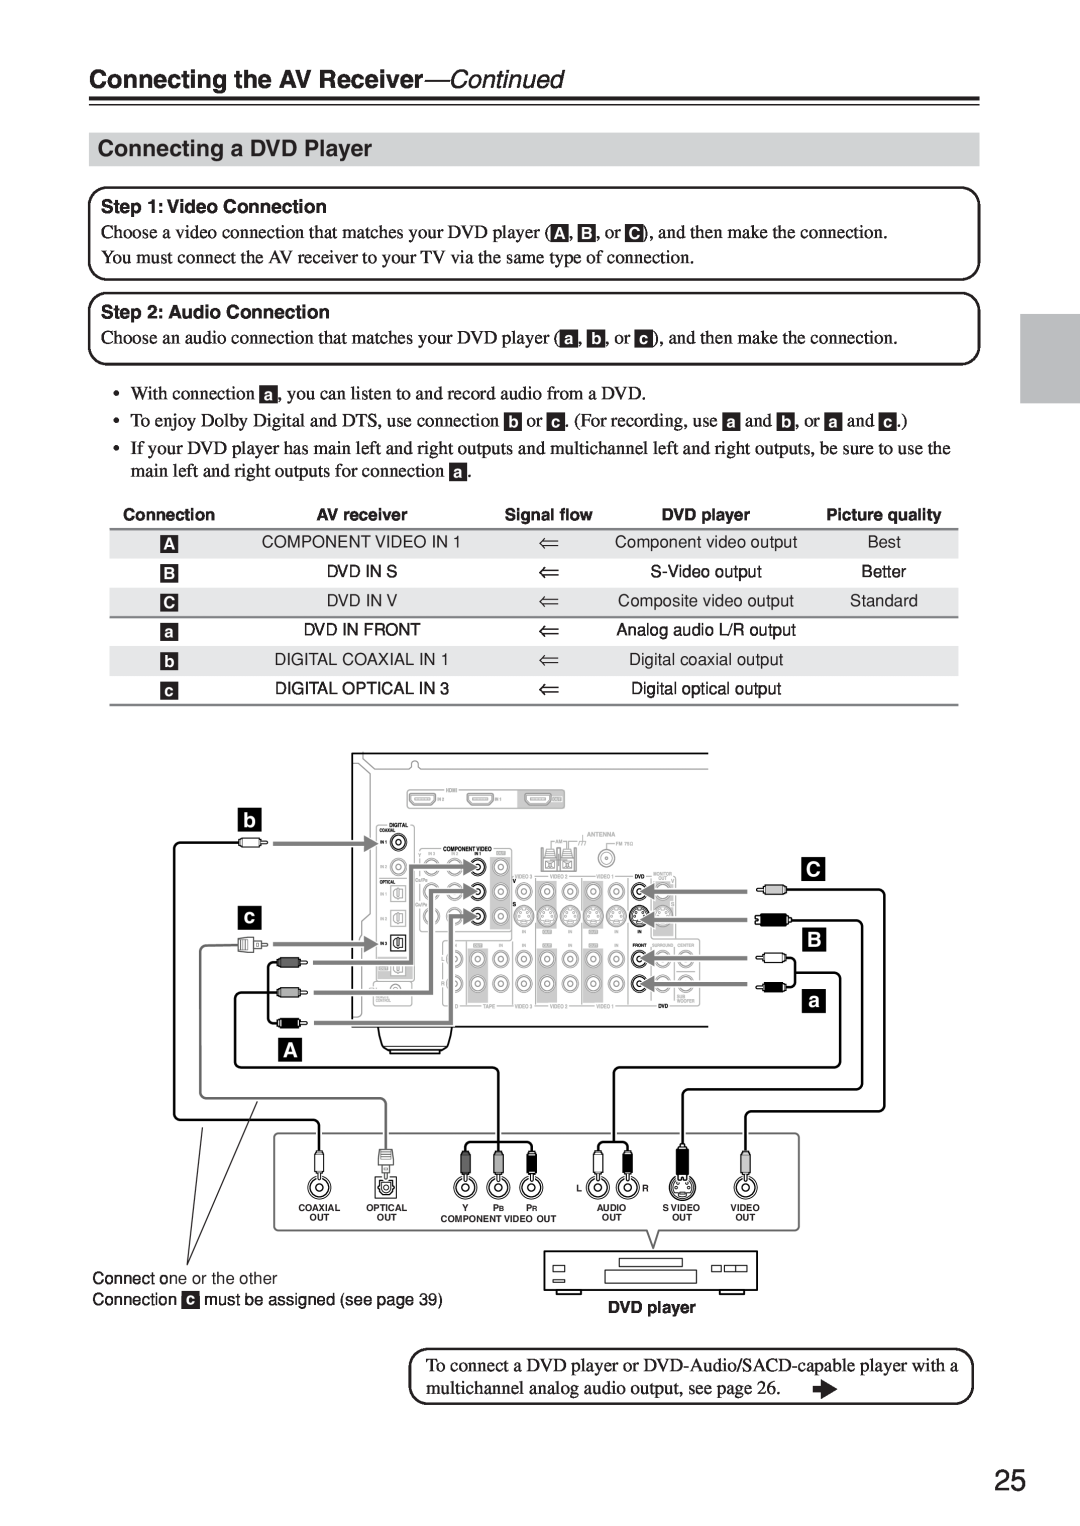 Onkyo HT-R640 instruction manual Connecting a DVD Player, b C c B a A, Connecting the AV Receiver-Continued 